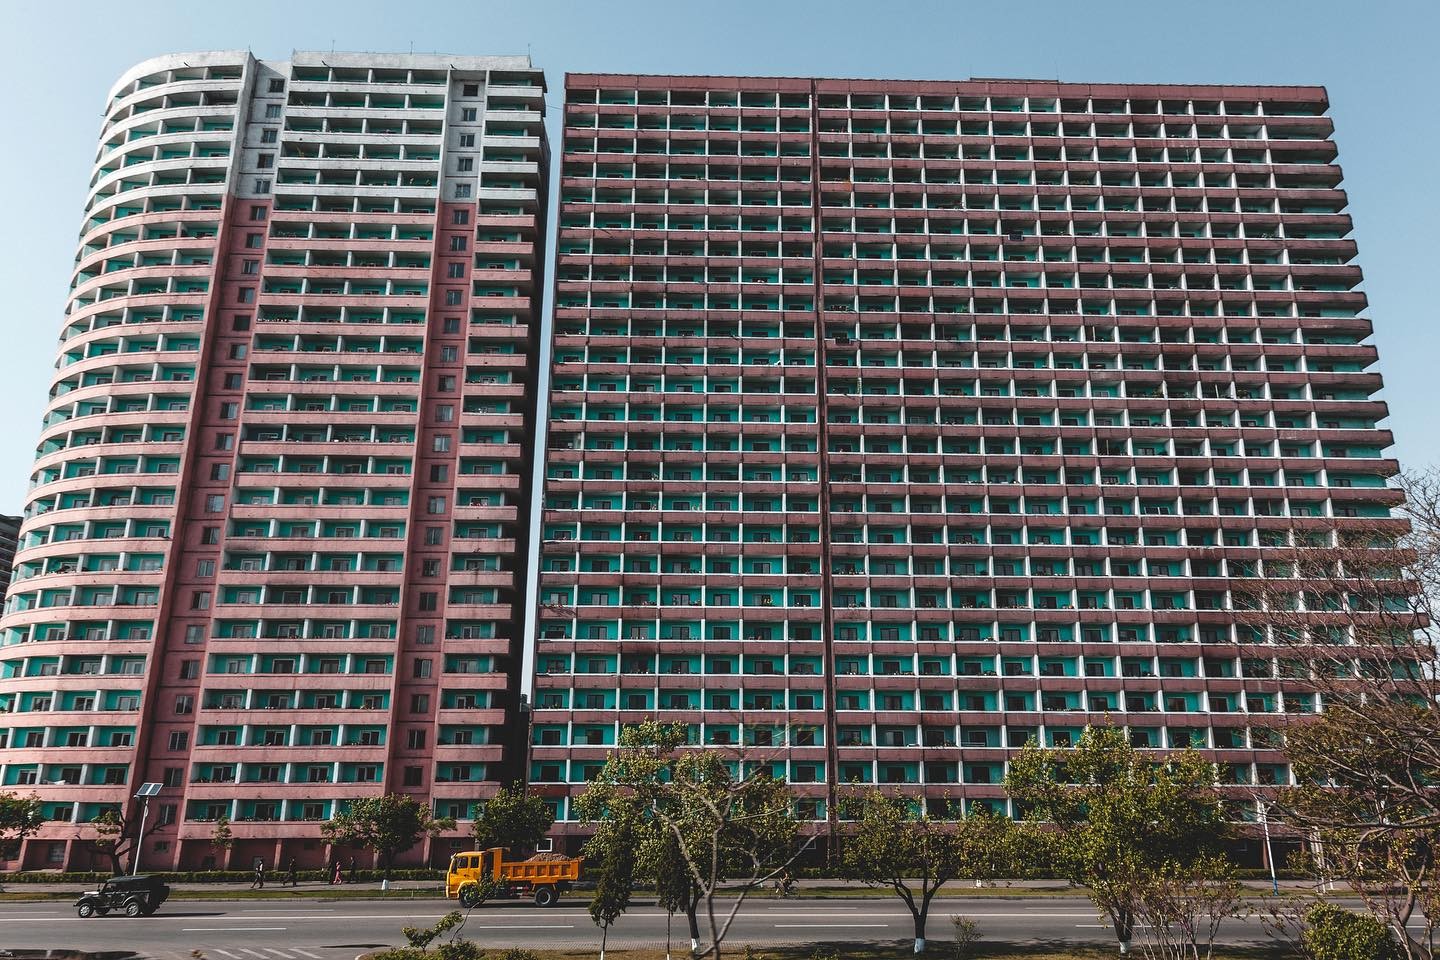 Huge apartment block in Pyongyang, North Korea.  Traveling there 4 times between 2009-2017 I saw surprising growth in the capital city.